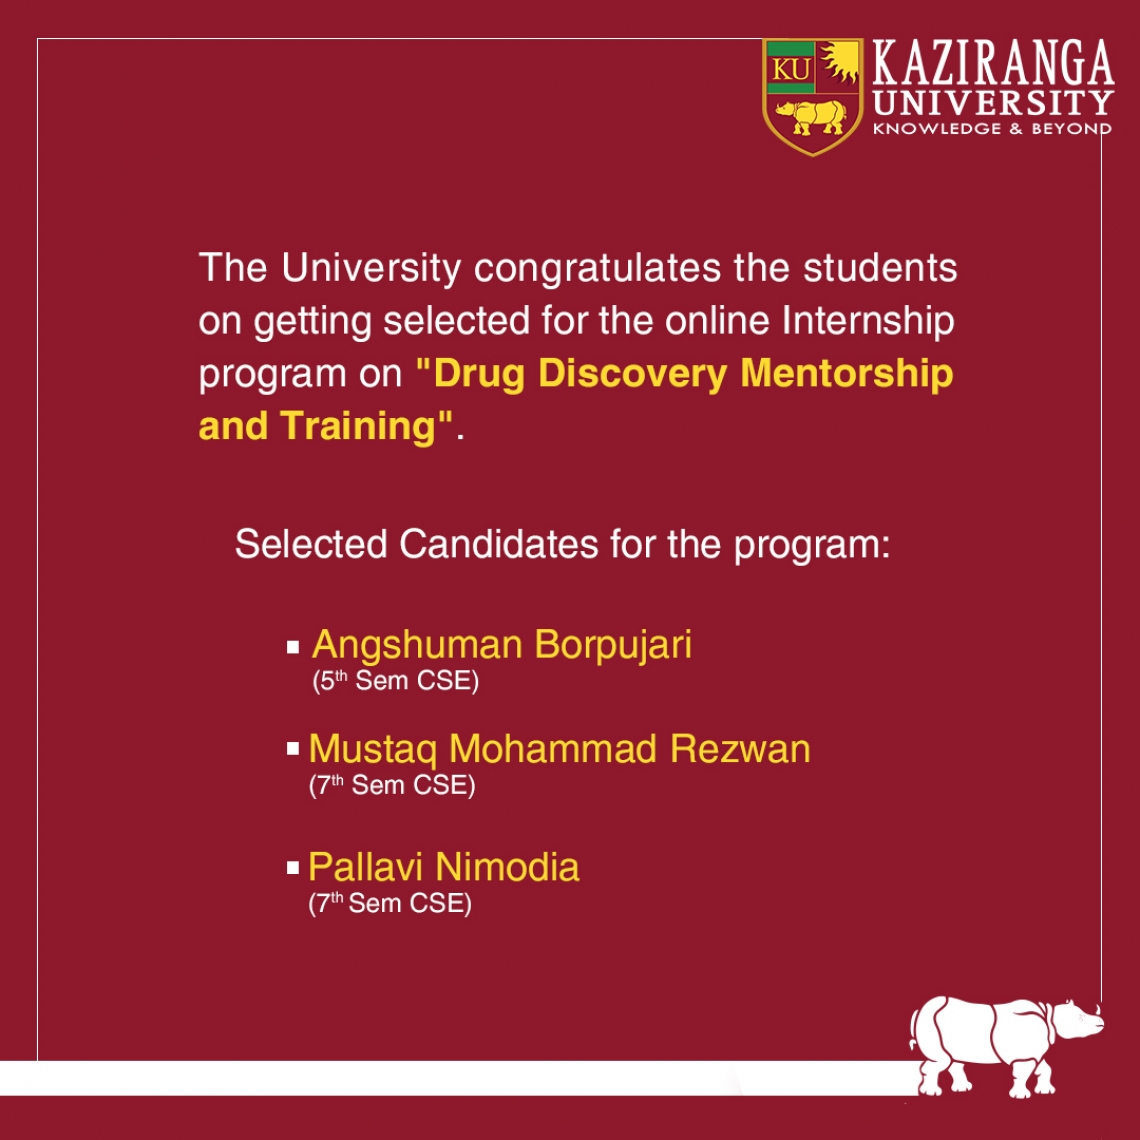 Congratulations on the selection for the Online Internship program on &quot;Drug Discovery Mentorship and Training&quot;.